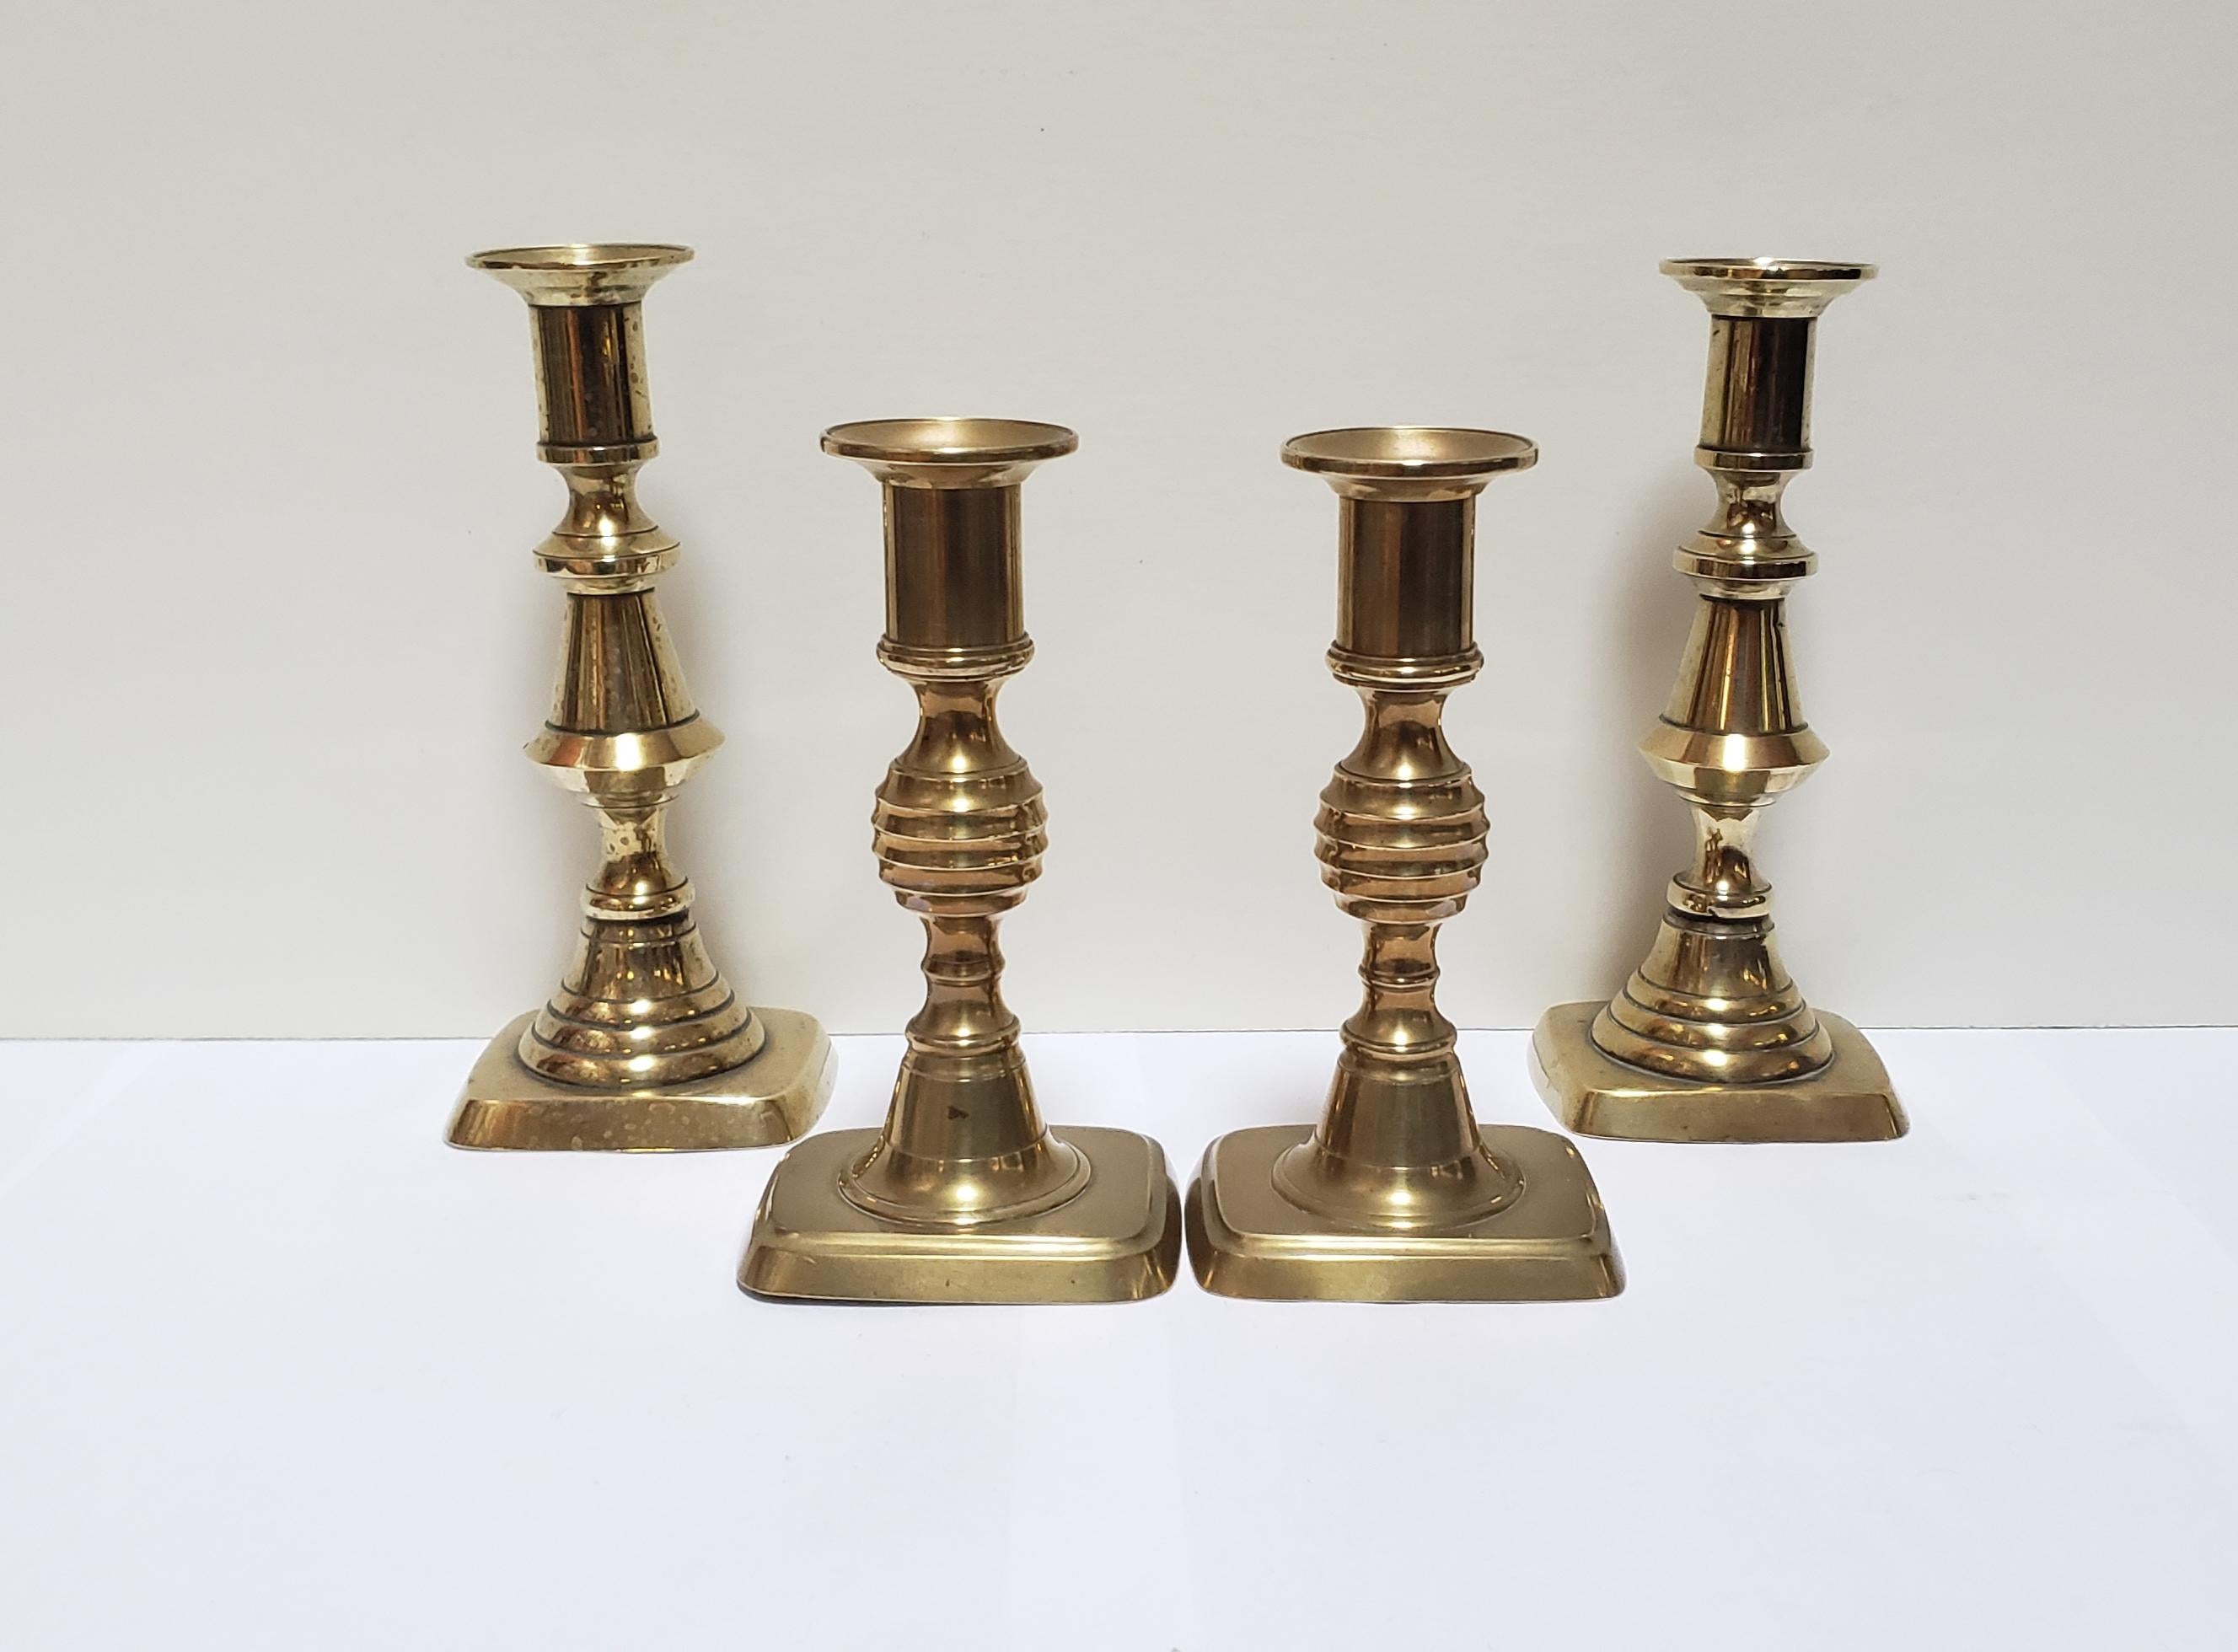 2 pairs of rectangular base, pull-up brass English candlesticks from the period of George IV (reign 1820-1830). The taller pair have a baluster turned pedestal while the shorter pair have a beehive knobbed pedestal. Both pairs have their original